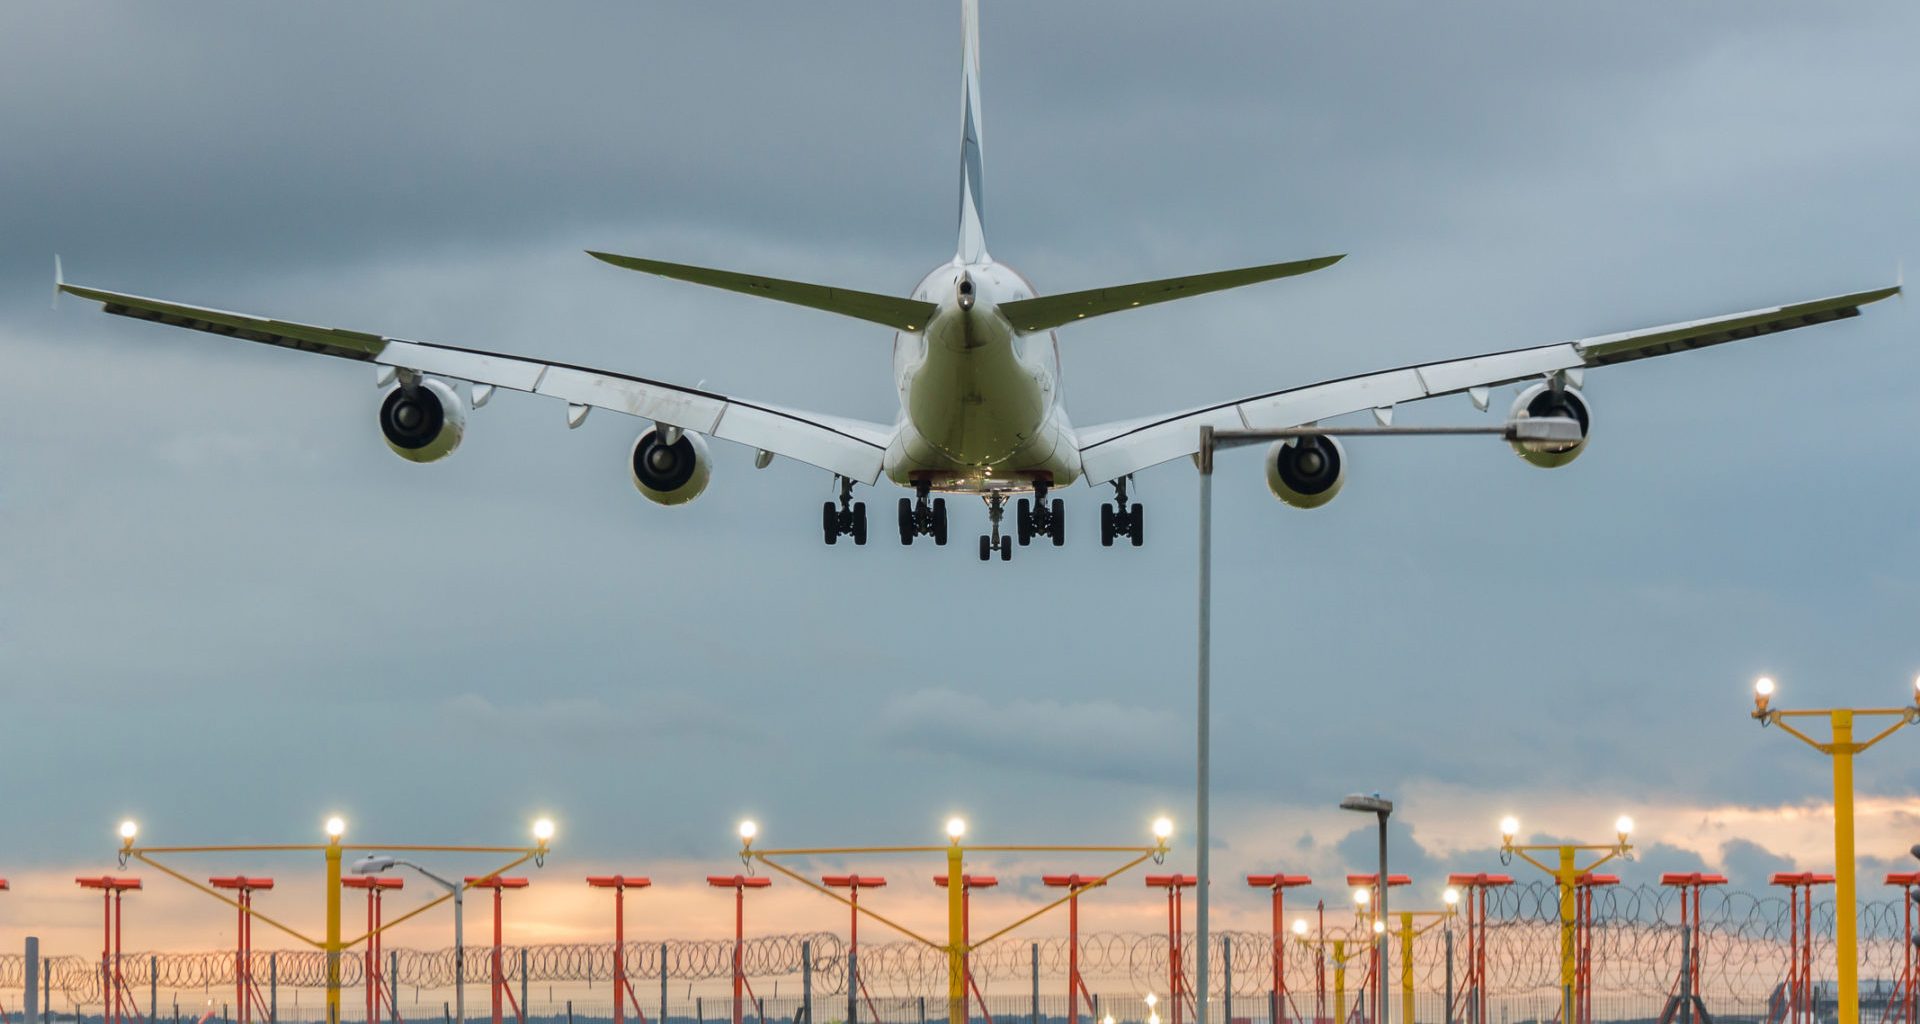 Government accused of ‘greenwashing deal’ in support of Heathrow 4